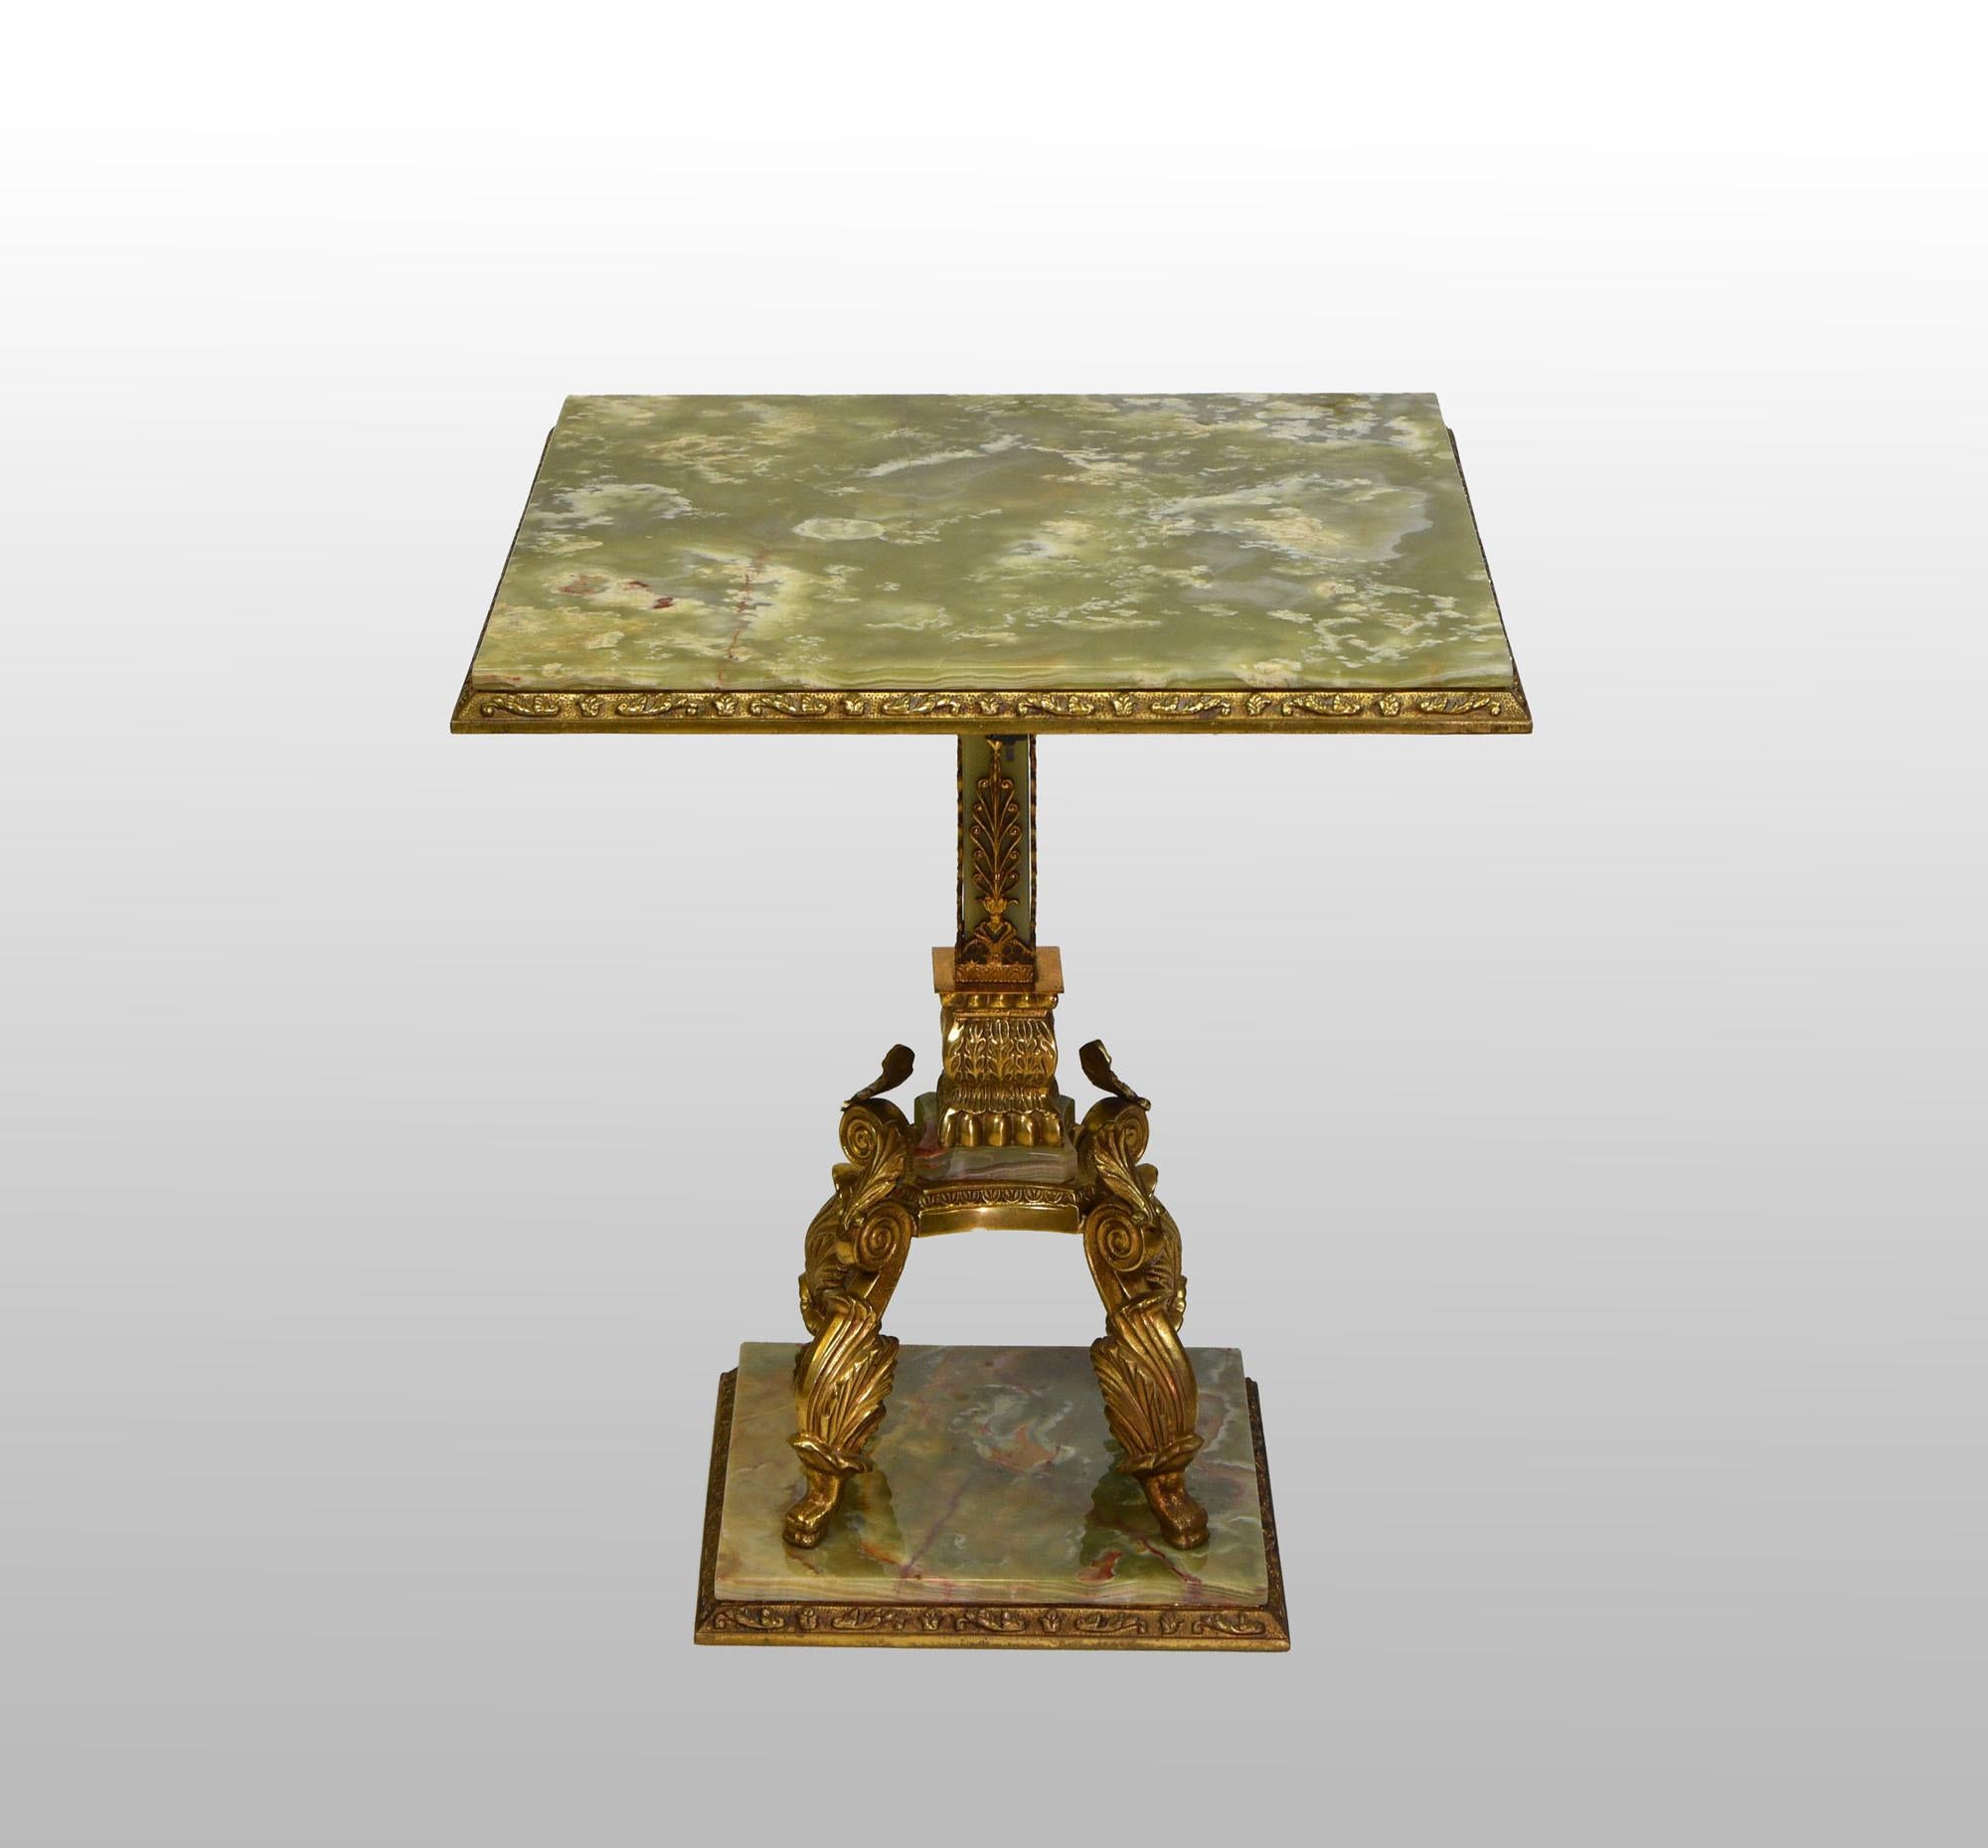 A good quality decorative onyx and brass side table. Circa 1950s.

The table stands on four scrolled pad feet with central pedestal. The oynx shows superb graining, there are a few surface marks with age.

There is a hairline in the oynx to